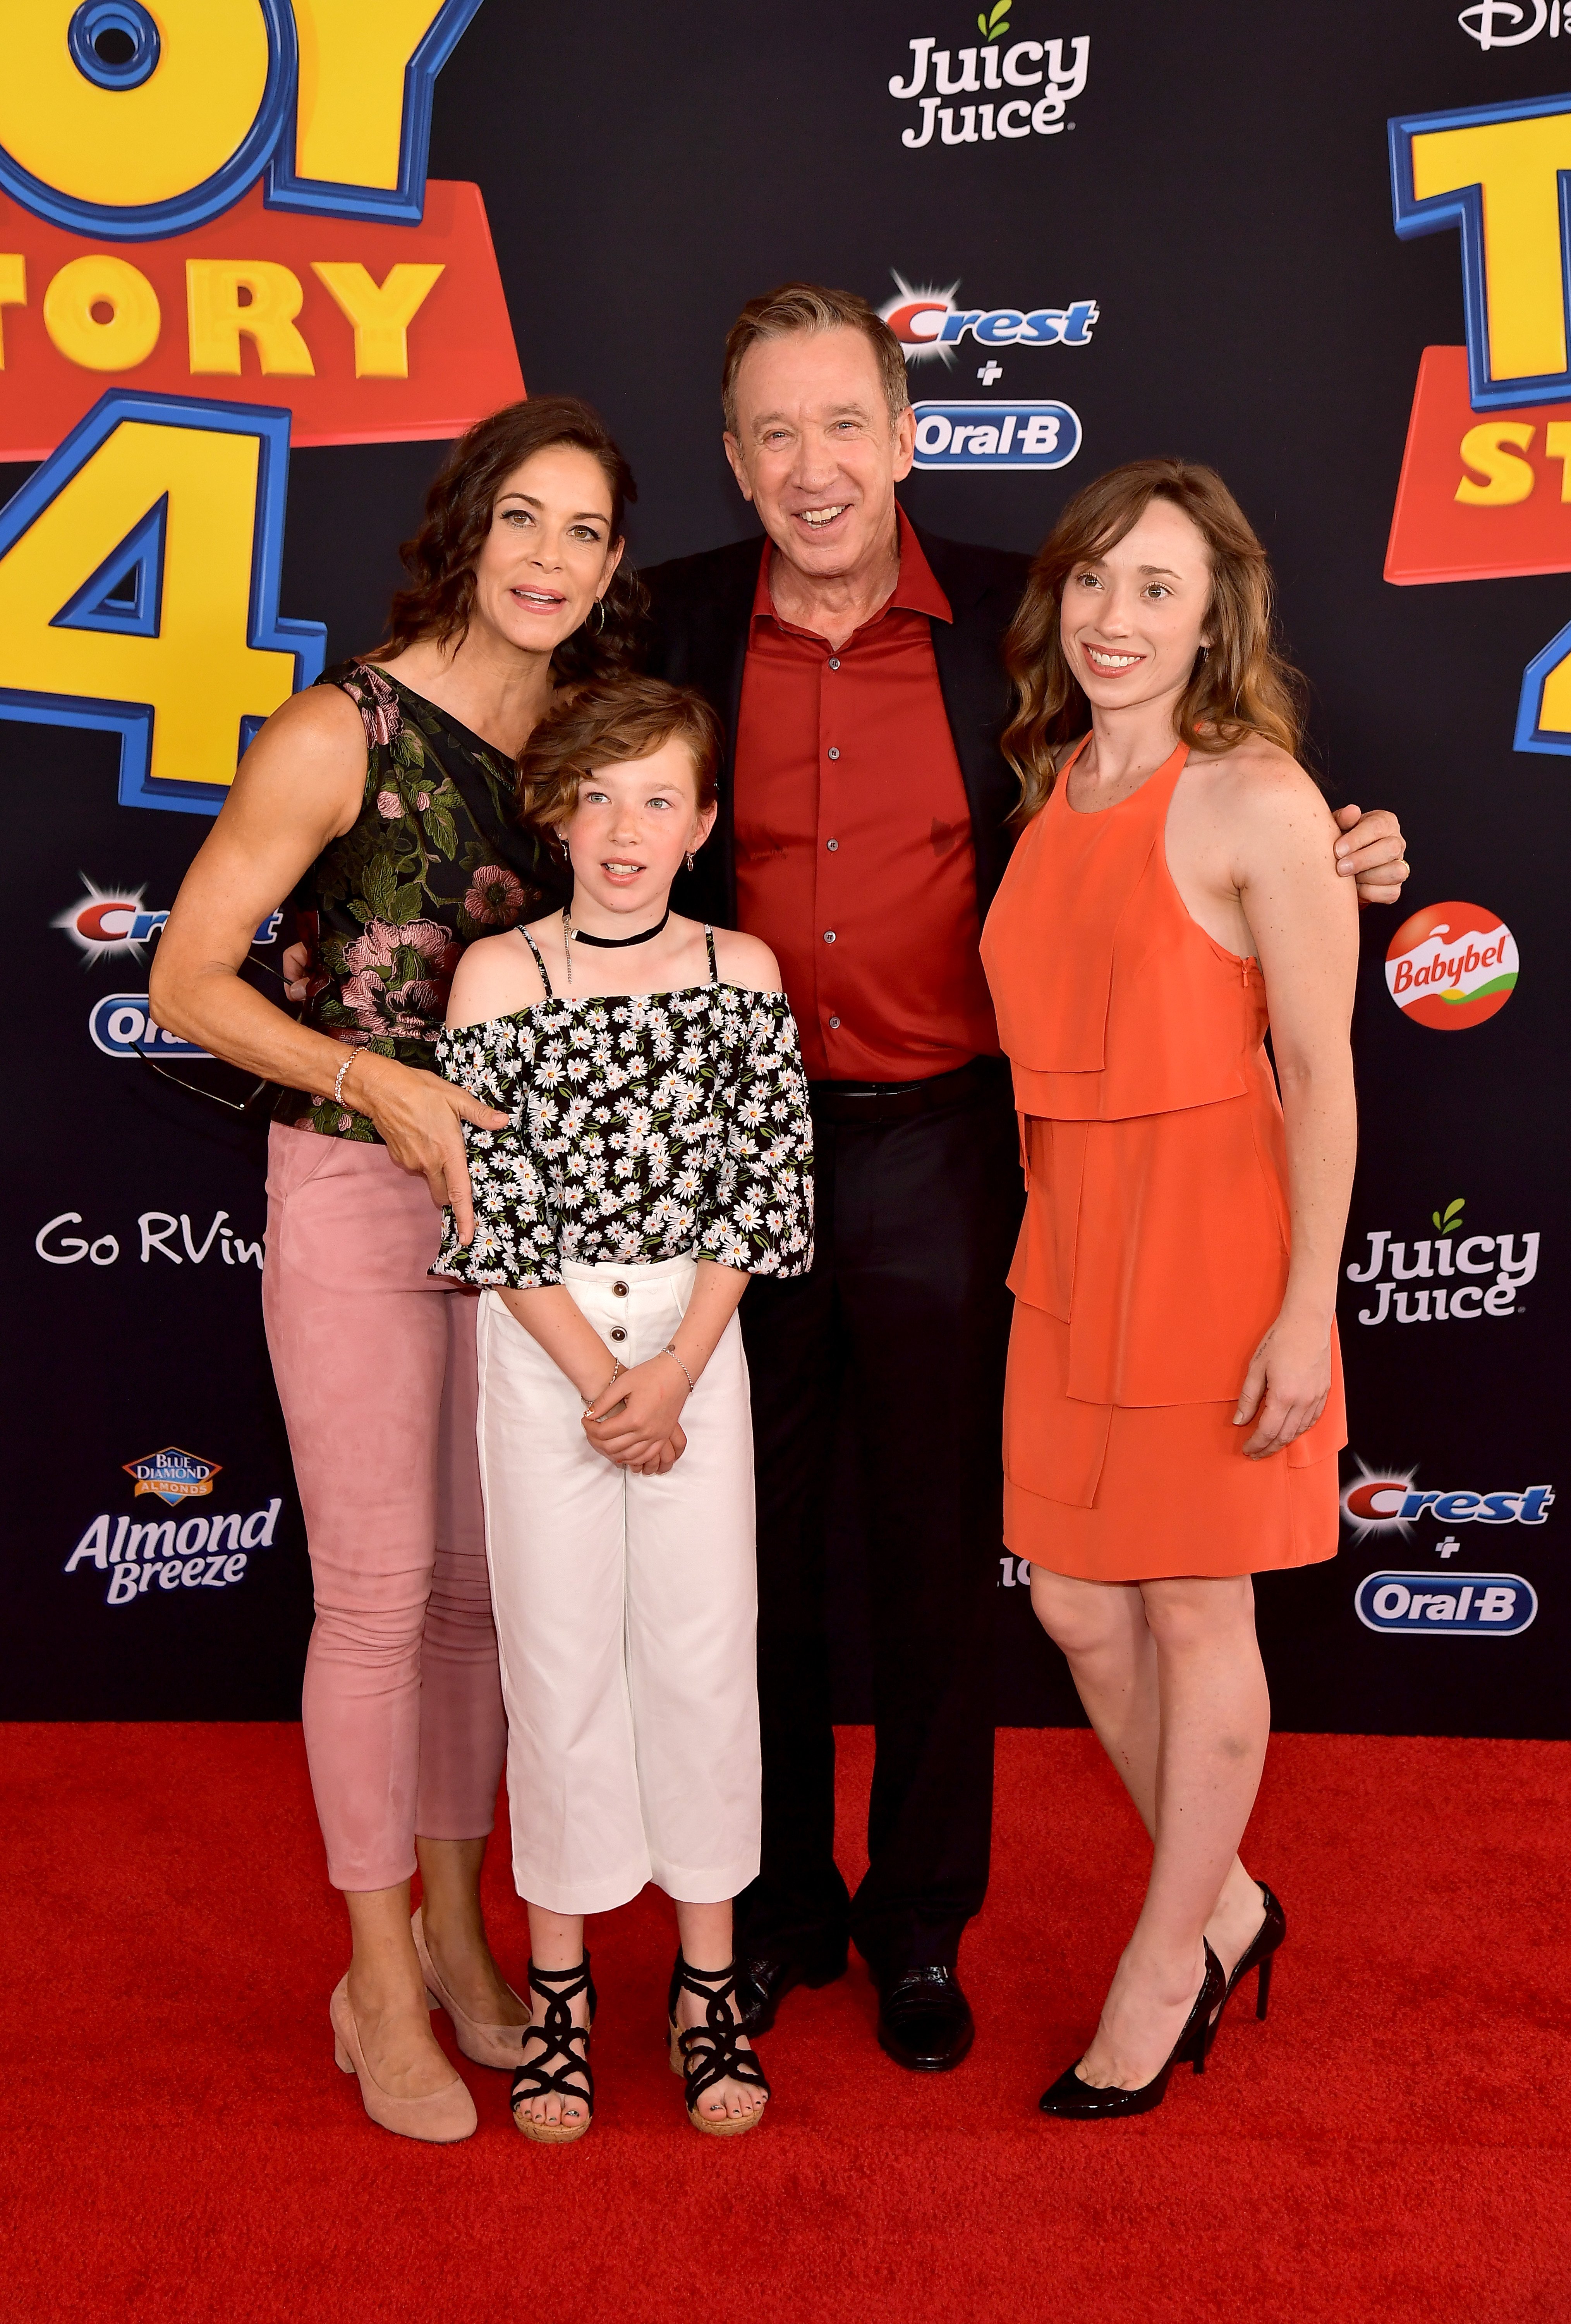 Katherine Allen and her family at the premiere of "Toy Story 4" on June 11, 2019 in California | Source: Getty Images